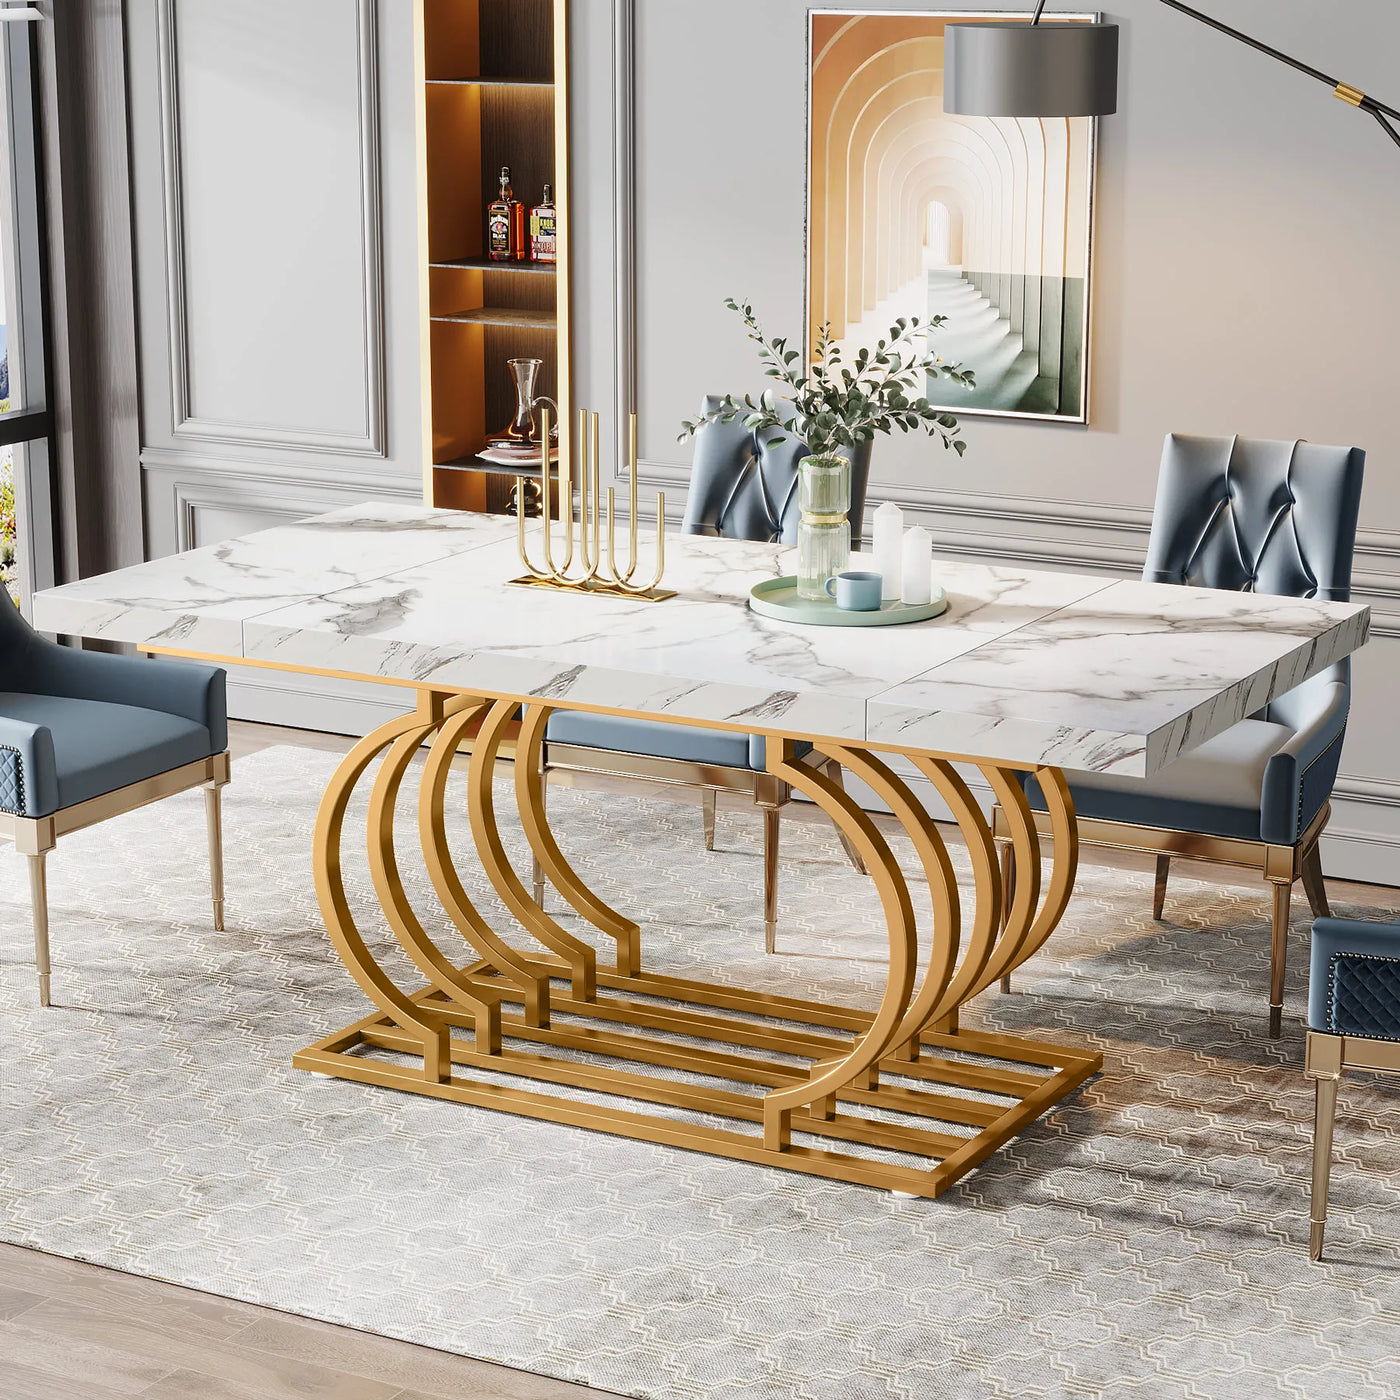 Limone 63" Marble Dining Table | Faux Modern Luxury Dining Room Table for 6 People, Rectangular Table for Kitchen, Dining Room